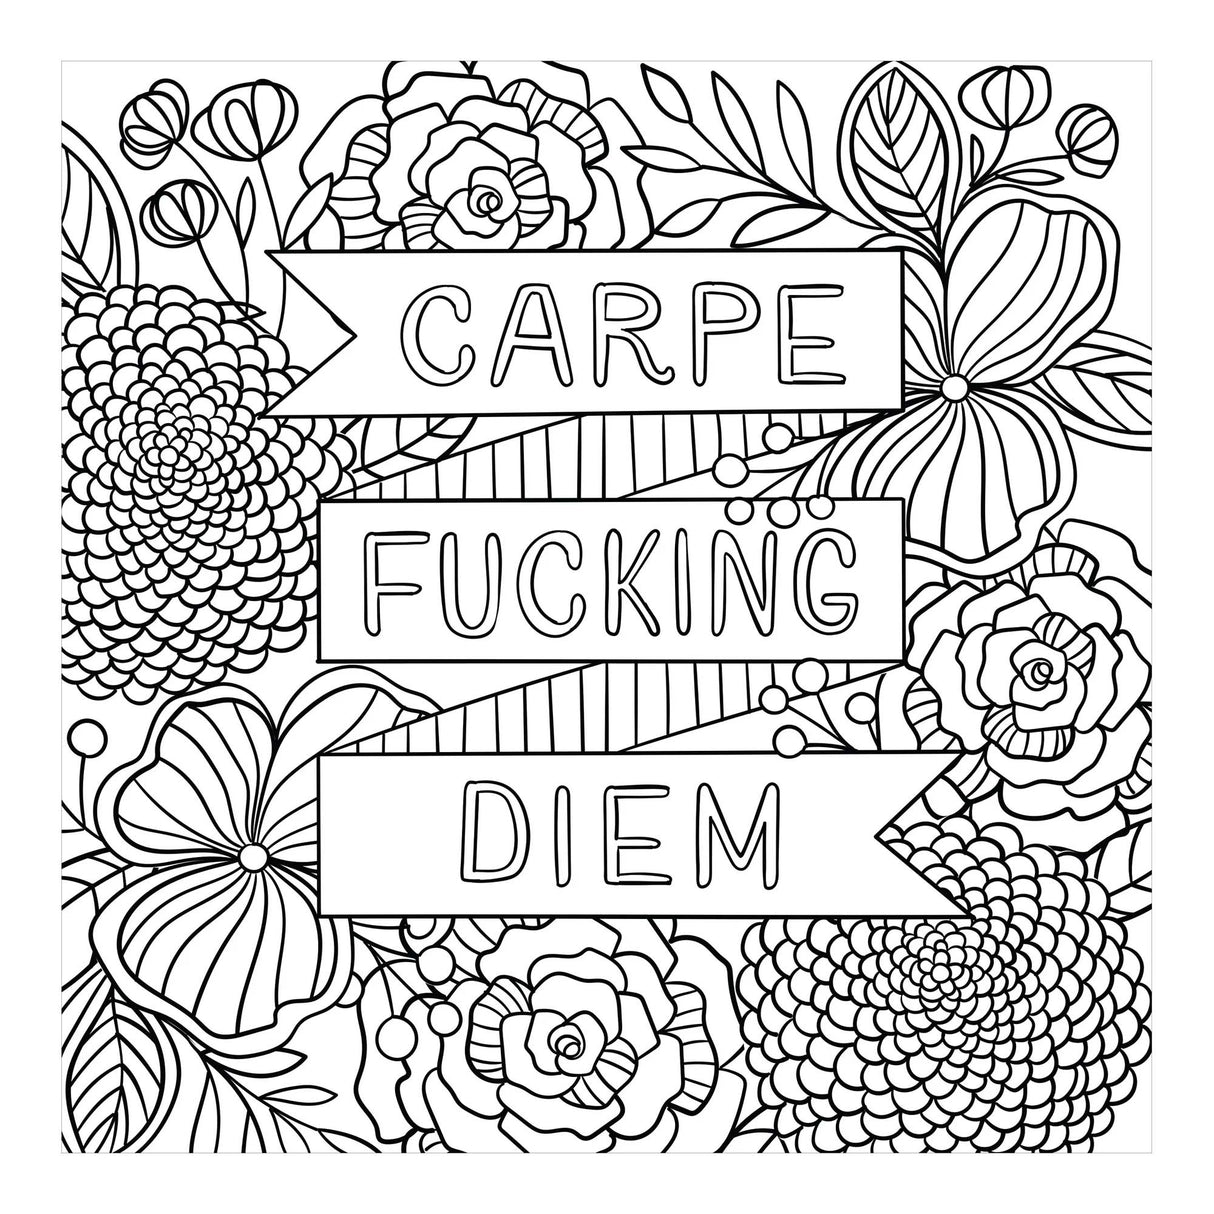 Inner F*cking Peace Adult Colouring Book